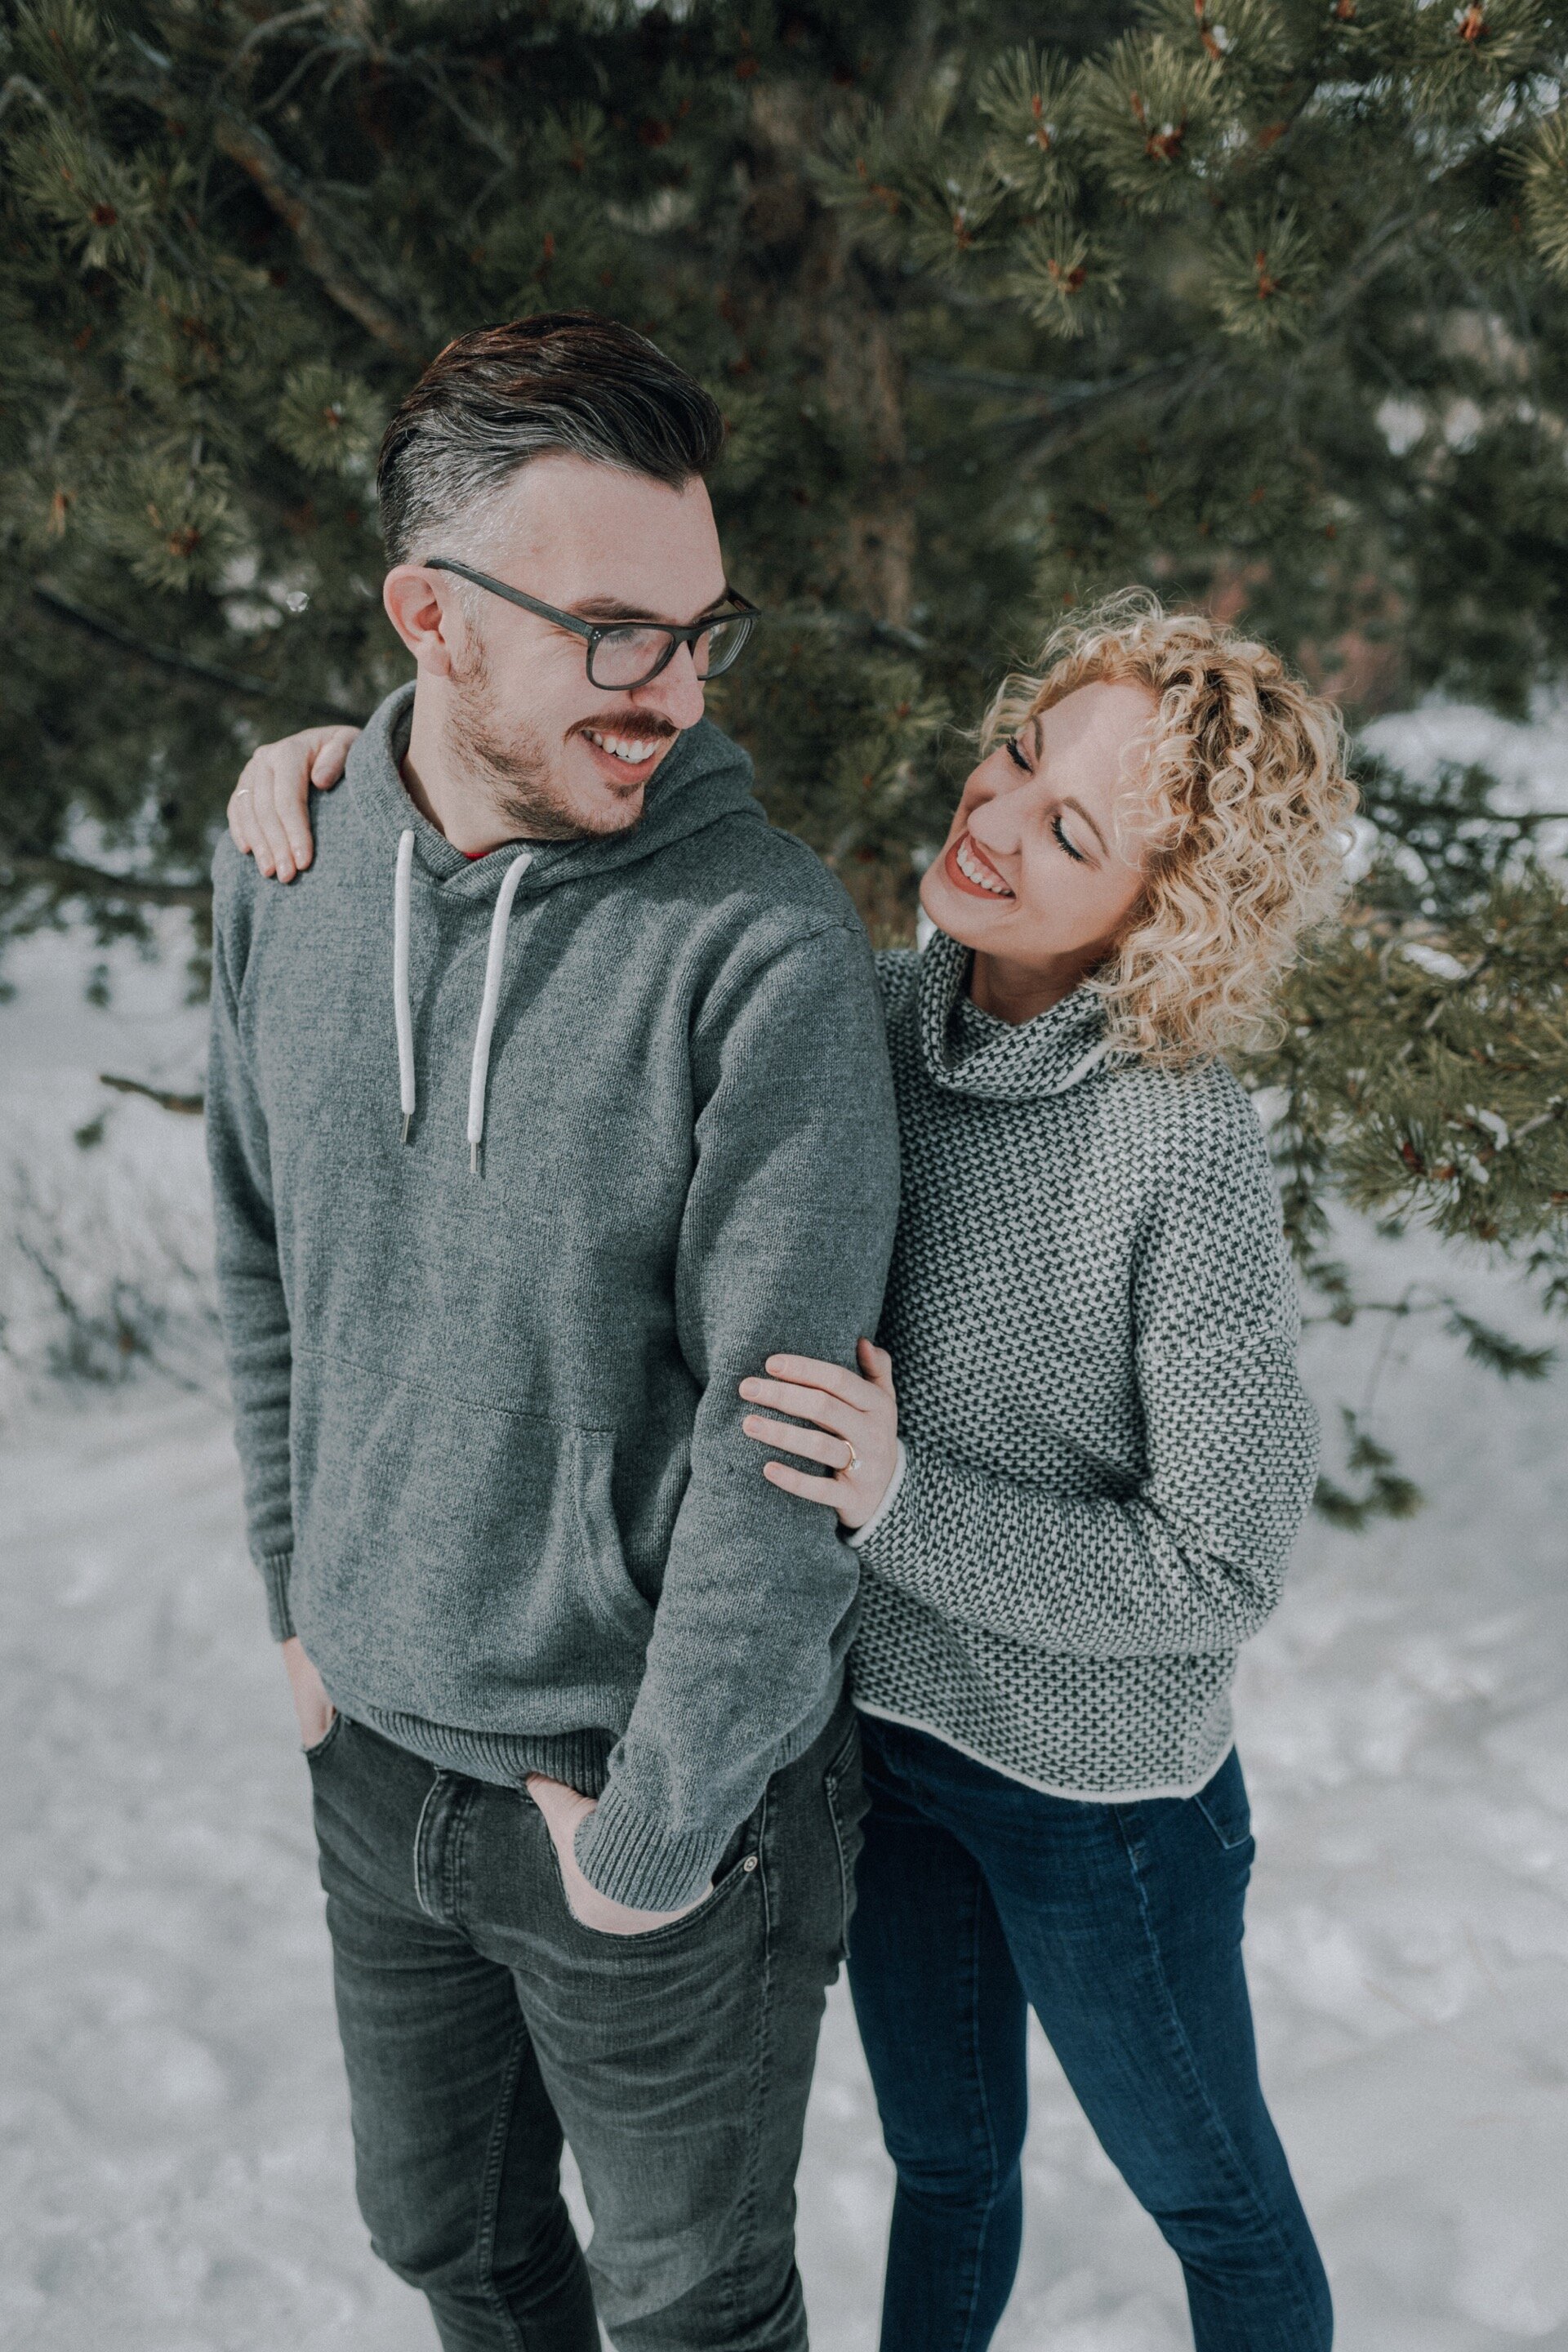 01_Kelsey&Taylor006_frisco_Photographer_engagement_Session_Co_Photography_Hannah_Minnesota_Snowy_Colorado_adventure_Mountain_ampe_engaged.jpg